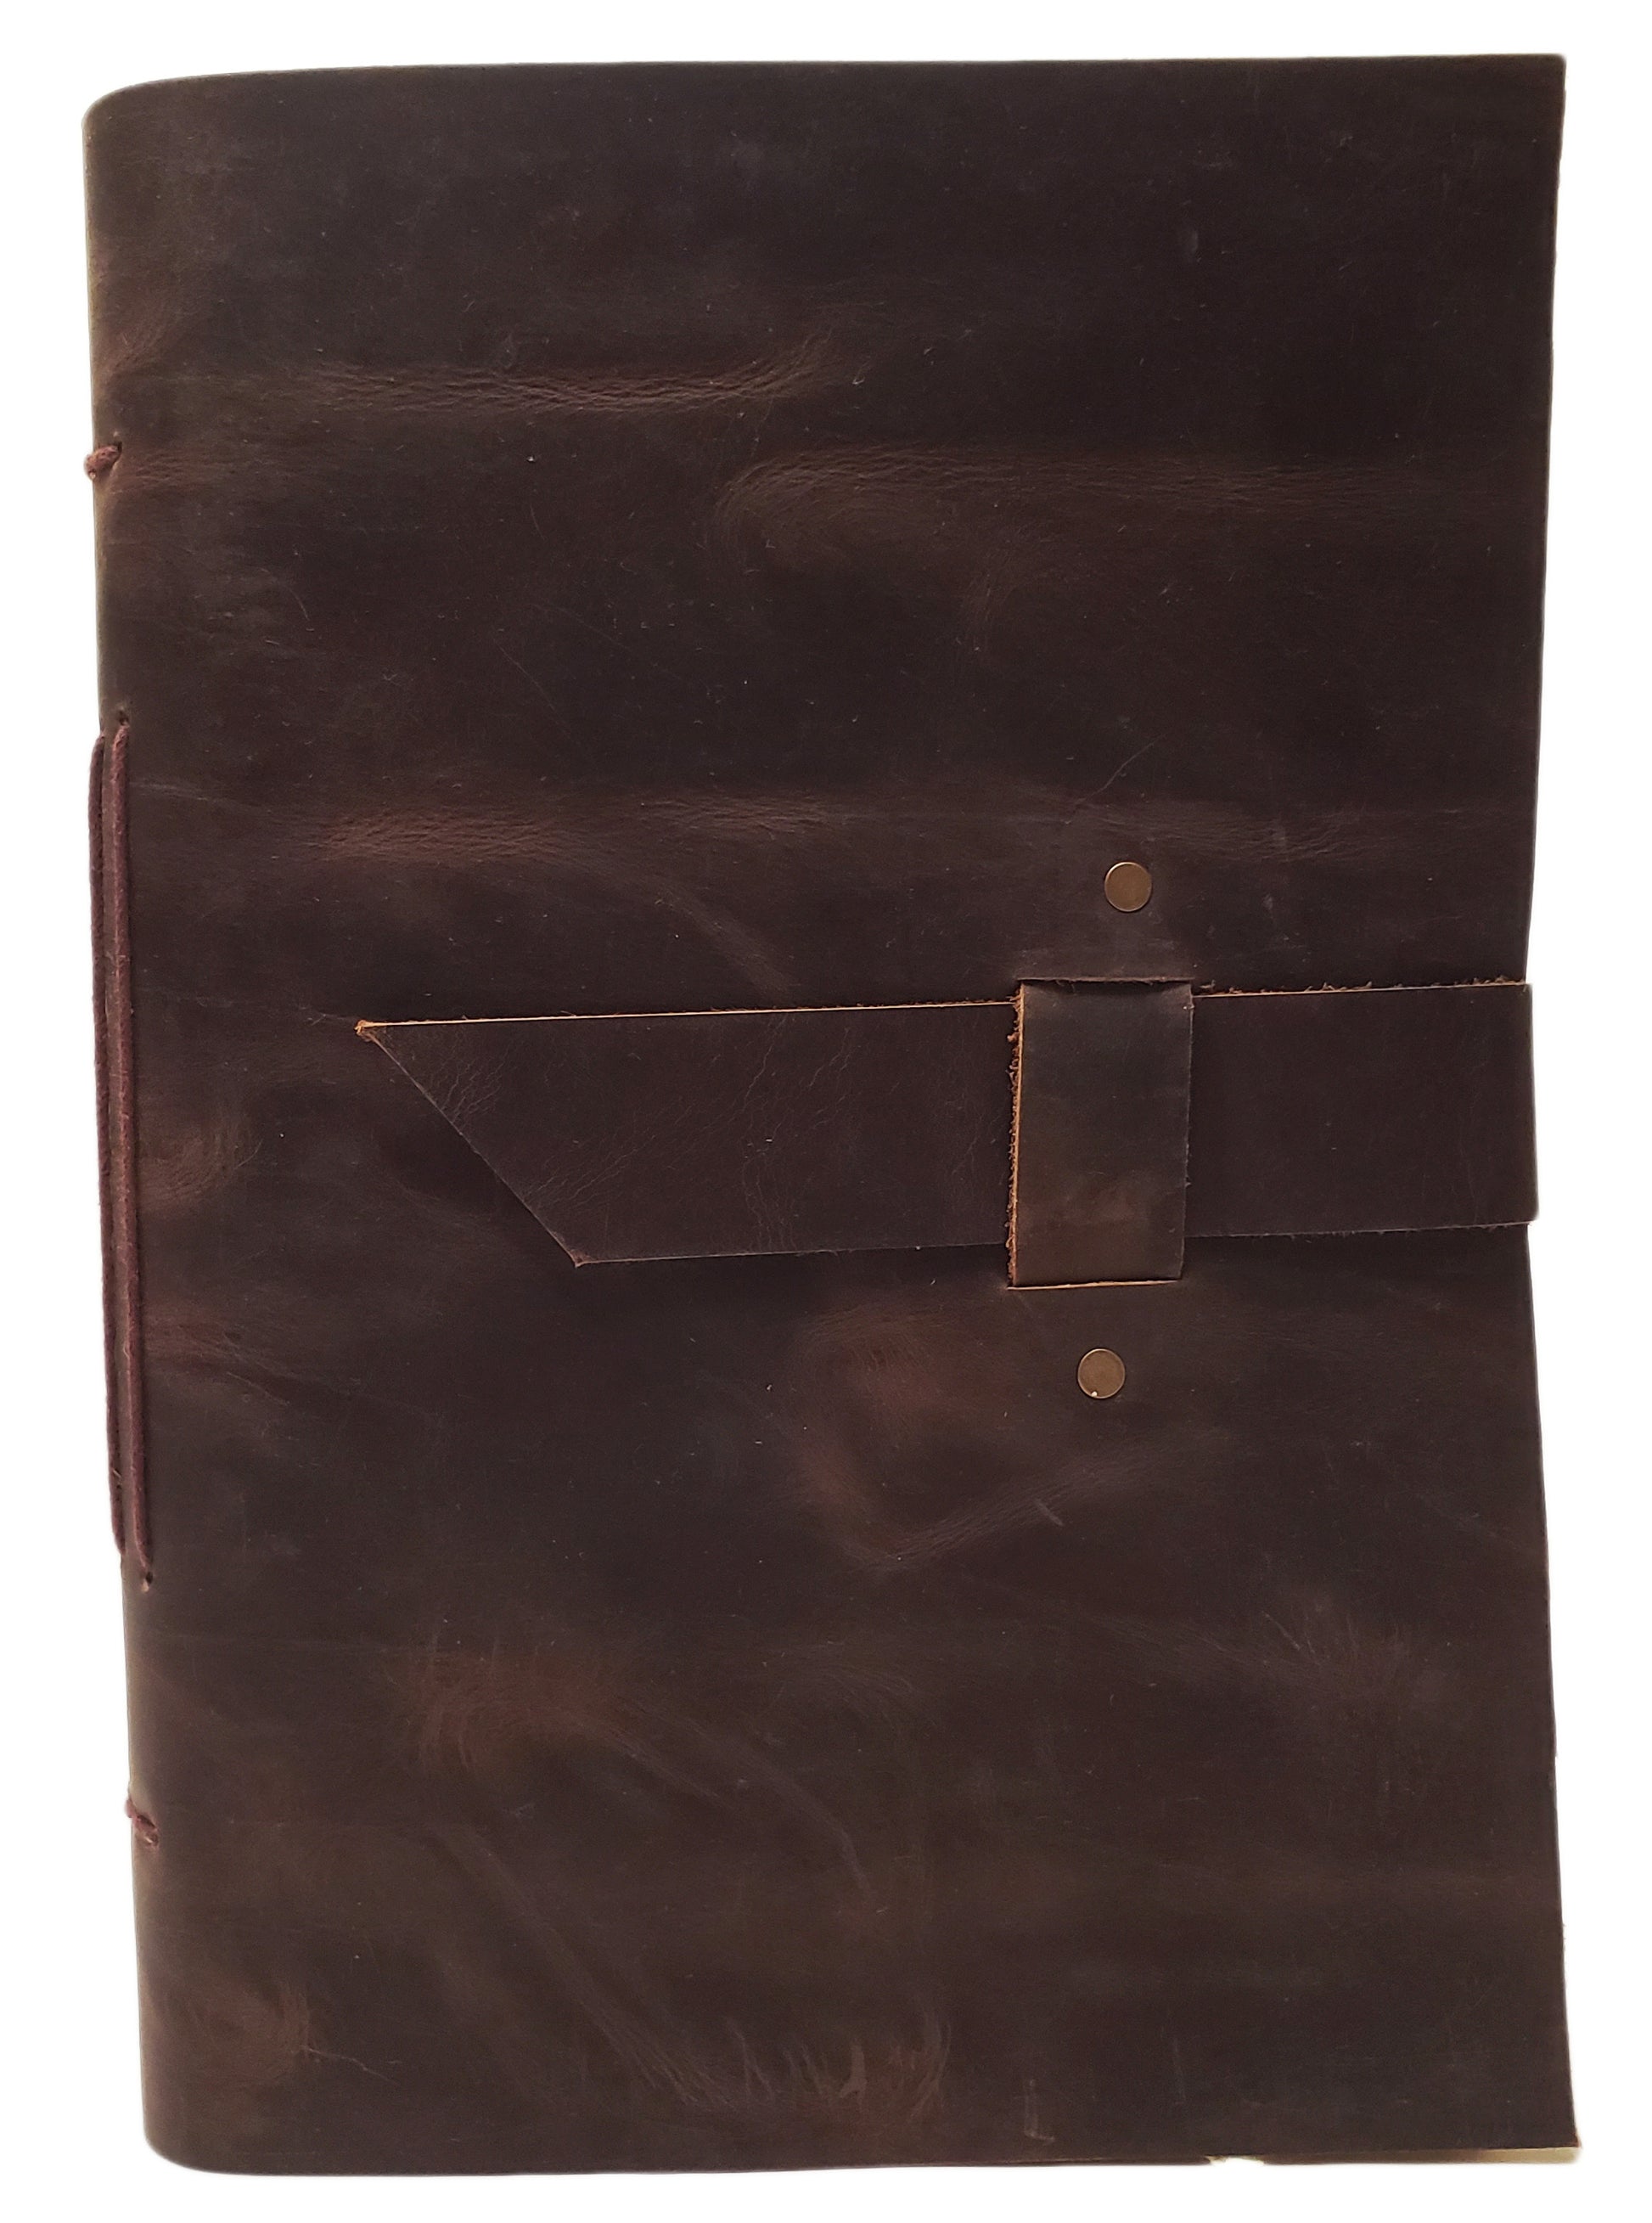 Rustico Leather Sketch Book - Dark Brown - 8.5 x 11 - Heartwood Gifts